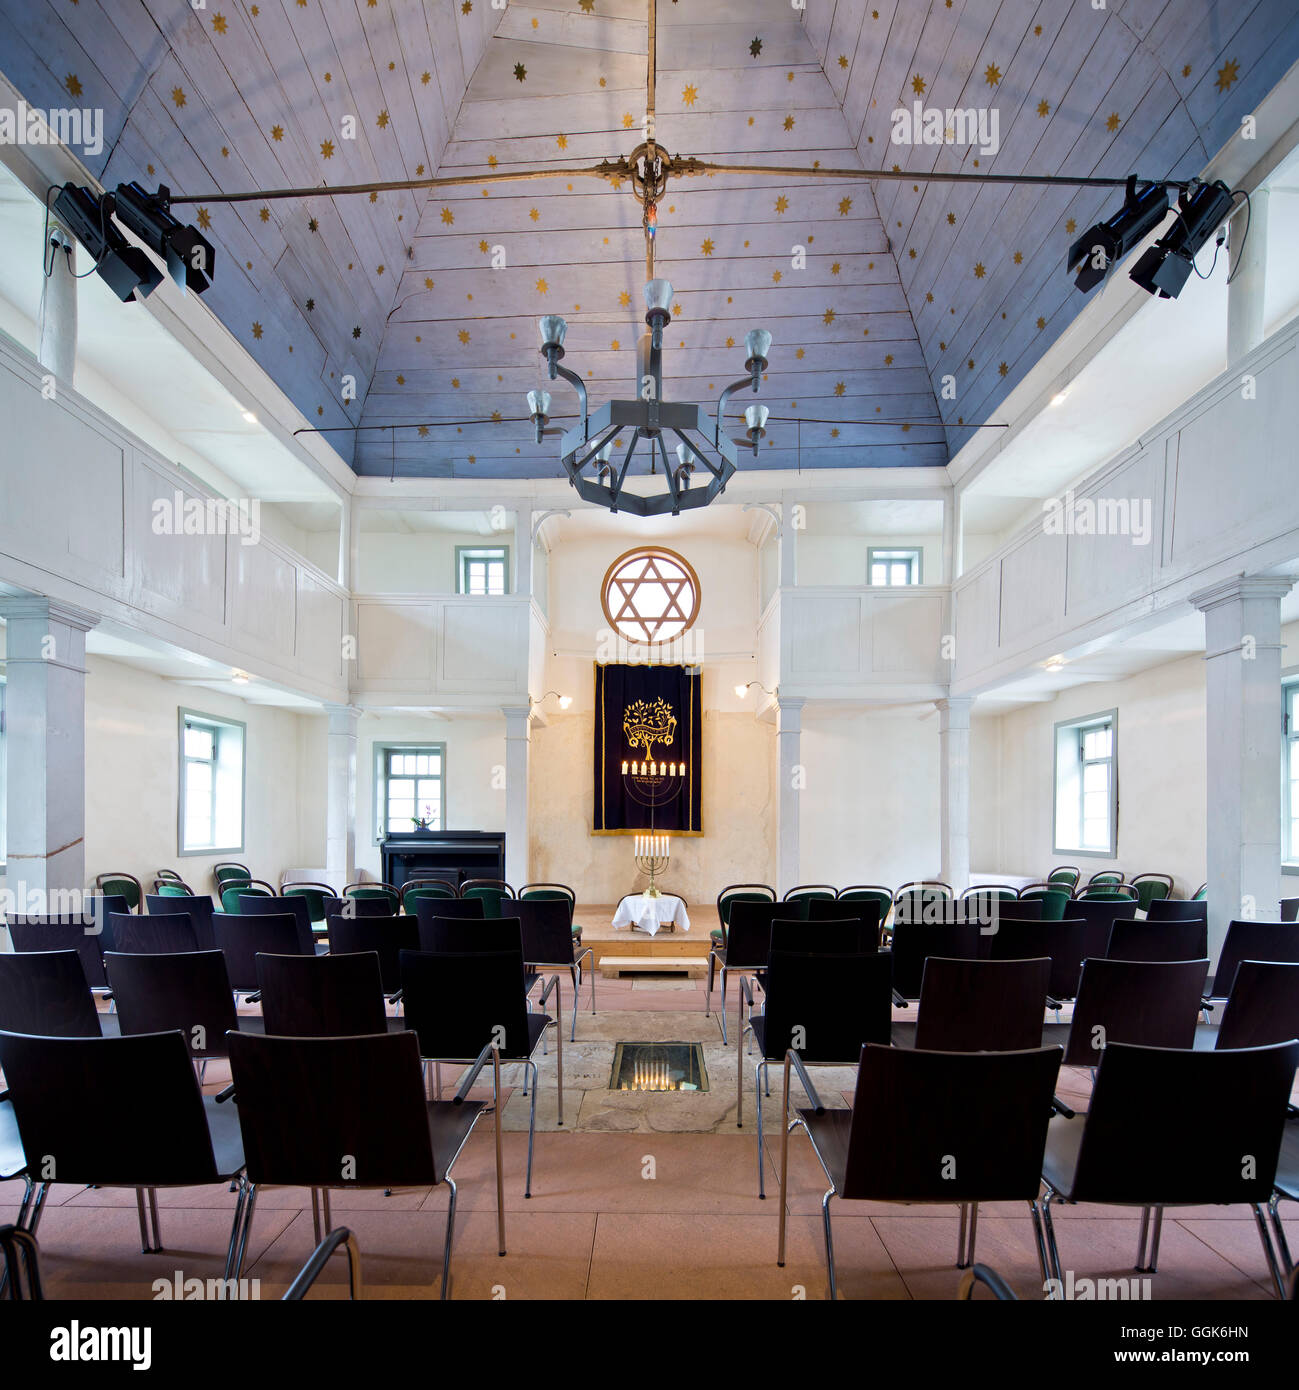 Interior of Voehl Synagogue with a seven-branched candelabrum, Voehl, Hesse, Germany, Europe Stock Photo